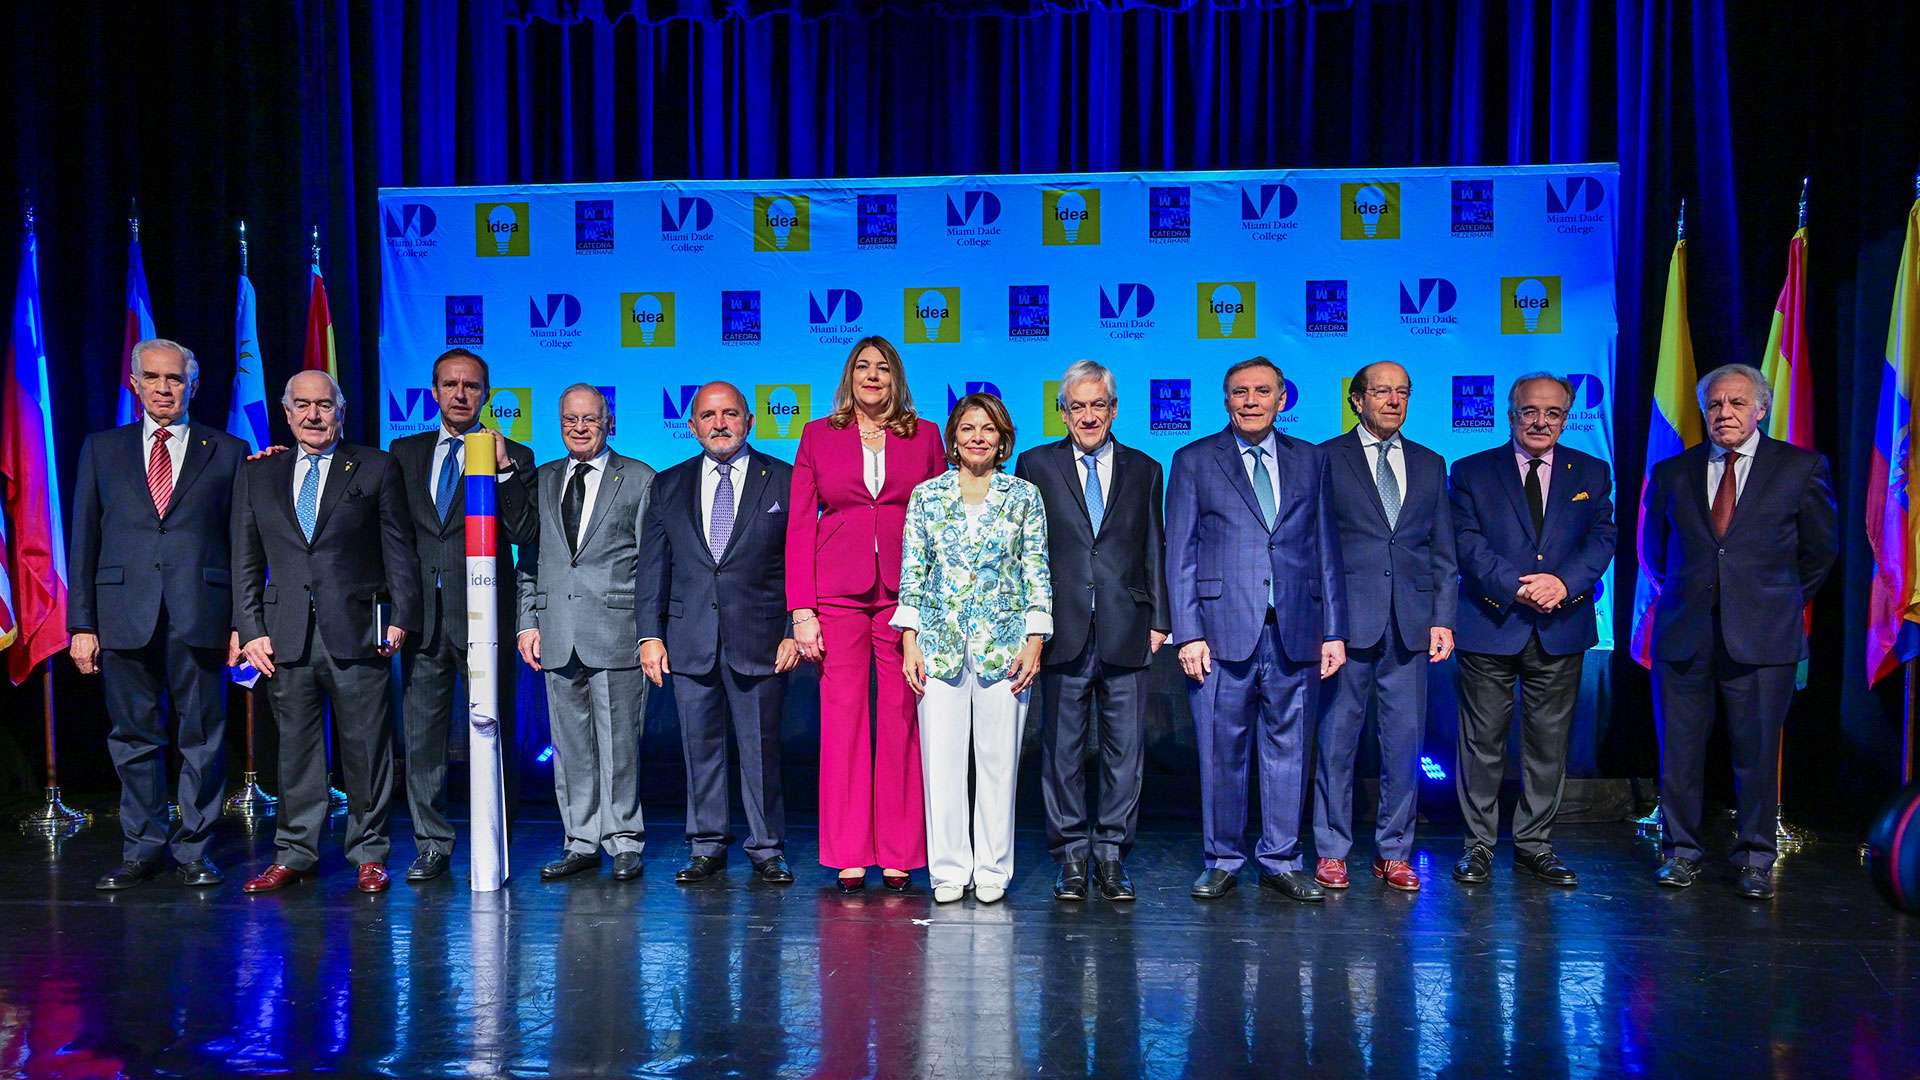 Global leaders on stage with the College president